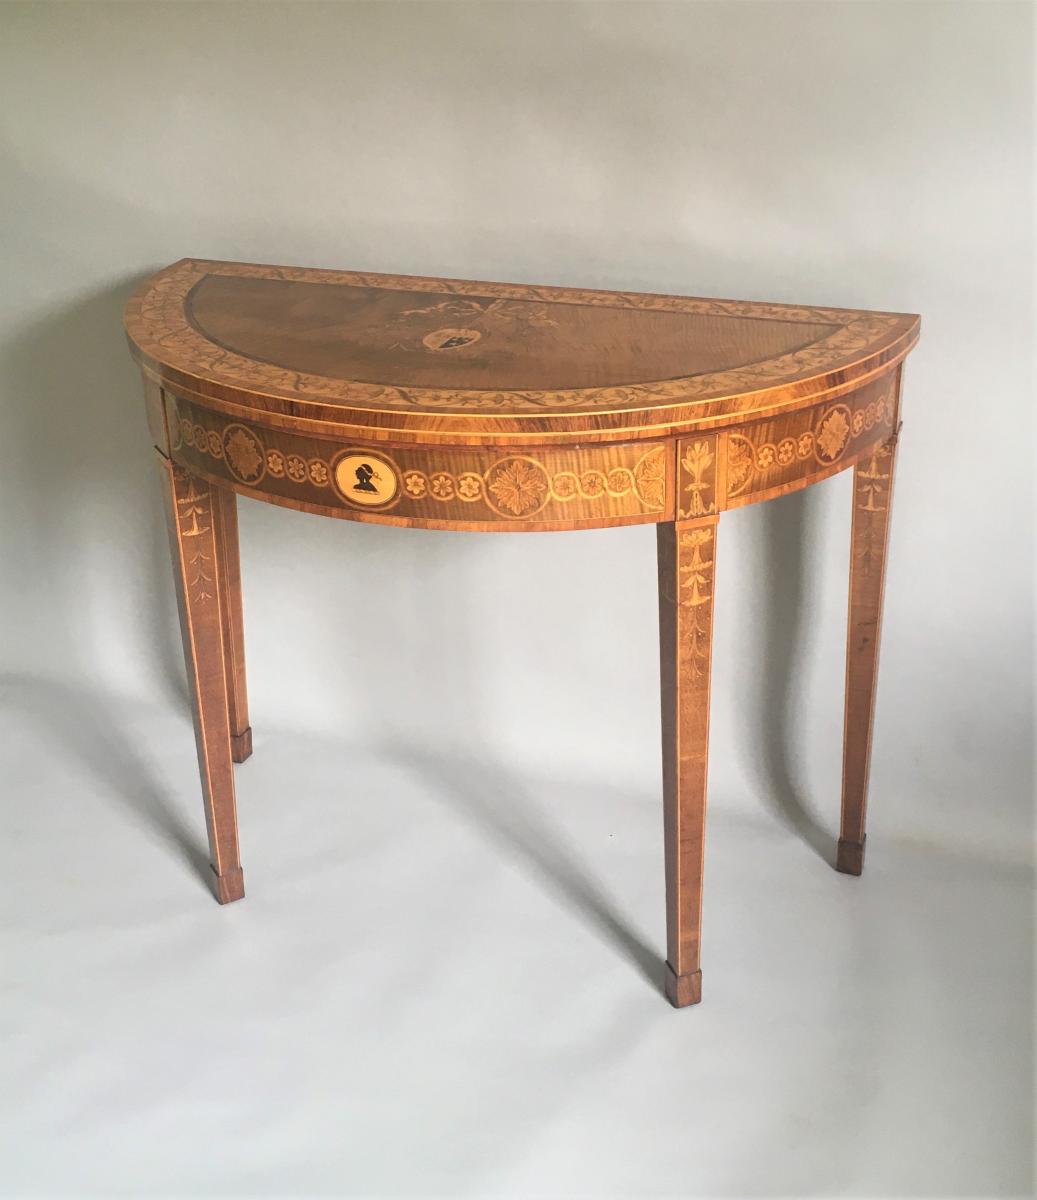 A GEORGE III SYCAMORE, TULIPWOOD, ROSEWOOD AND MARQUETRY CARD TABLE CIRCA 1780-90. IN THE MANNER OF MAYHEW & INCE.